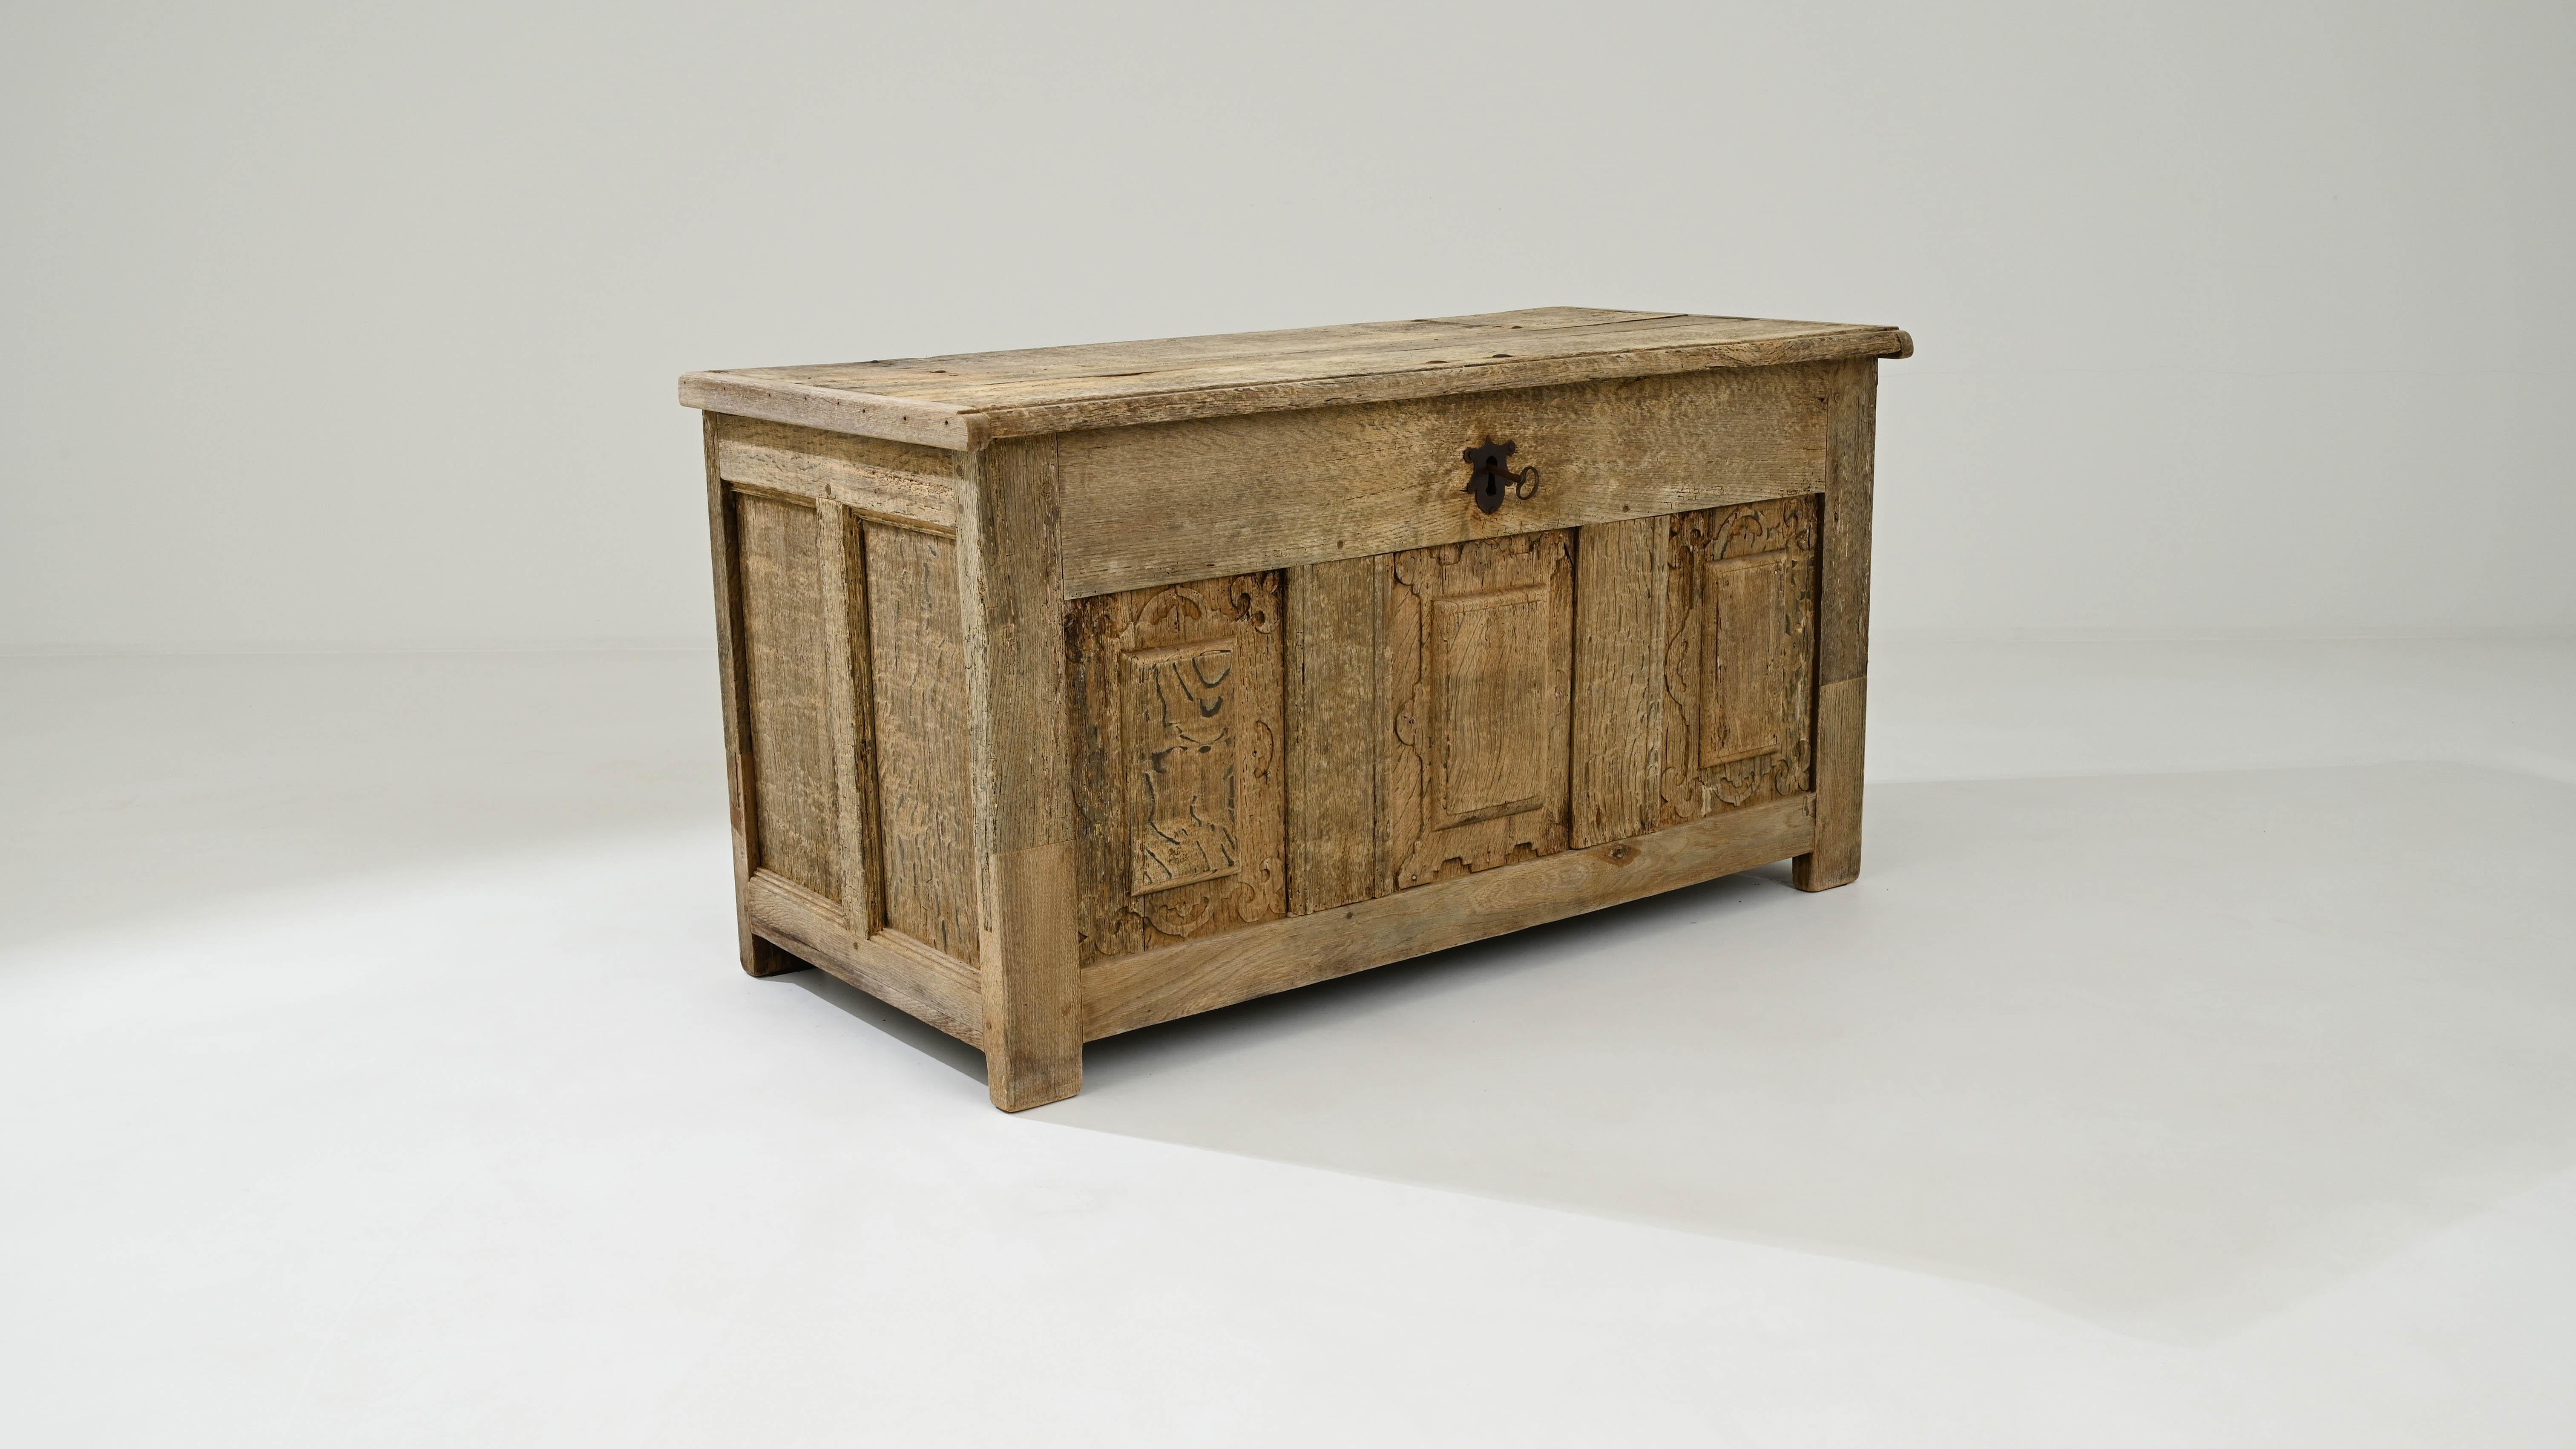 A beautiful bleached oak chest, from circa 19th Century France. Refined in its old age, this antique yet stylish chest offers a roomy storage compartment and a charming exterior. Sparse metal details and finely carved details ripple across its